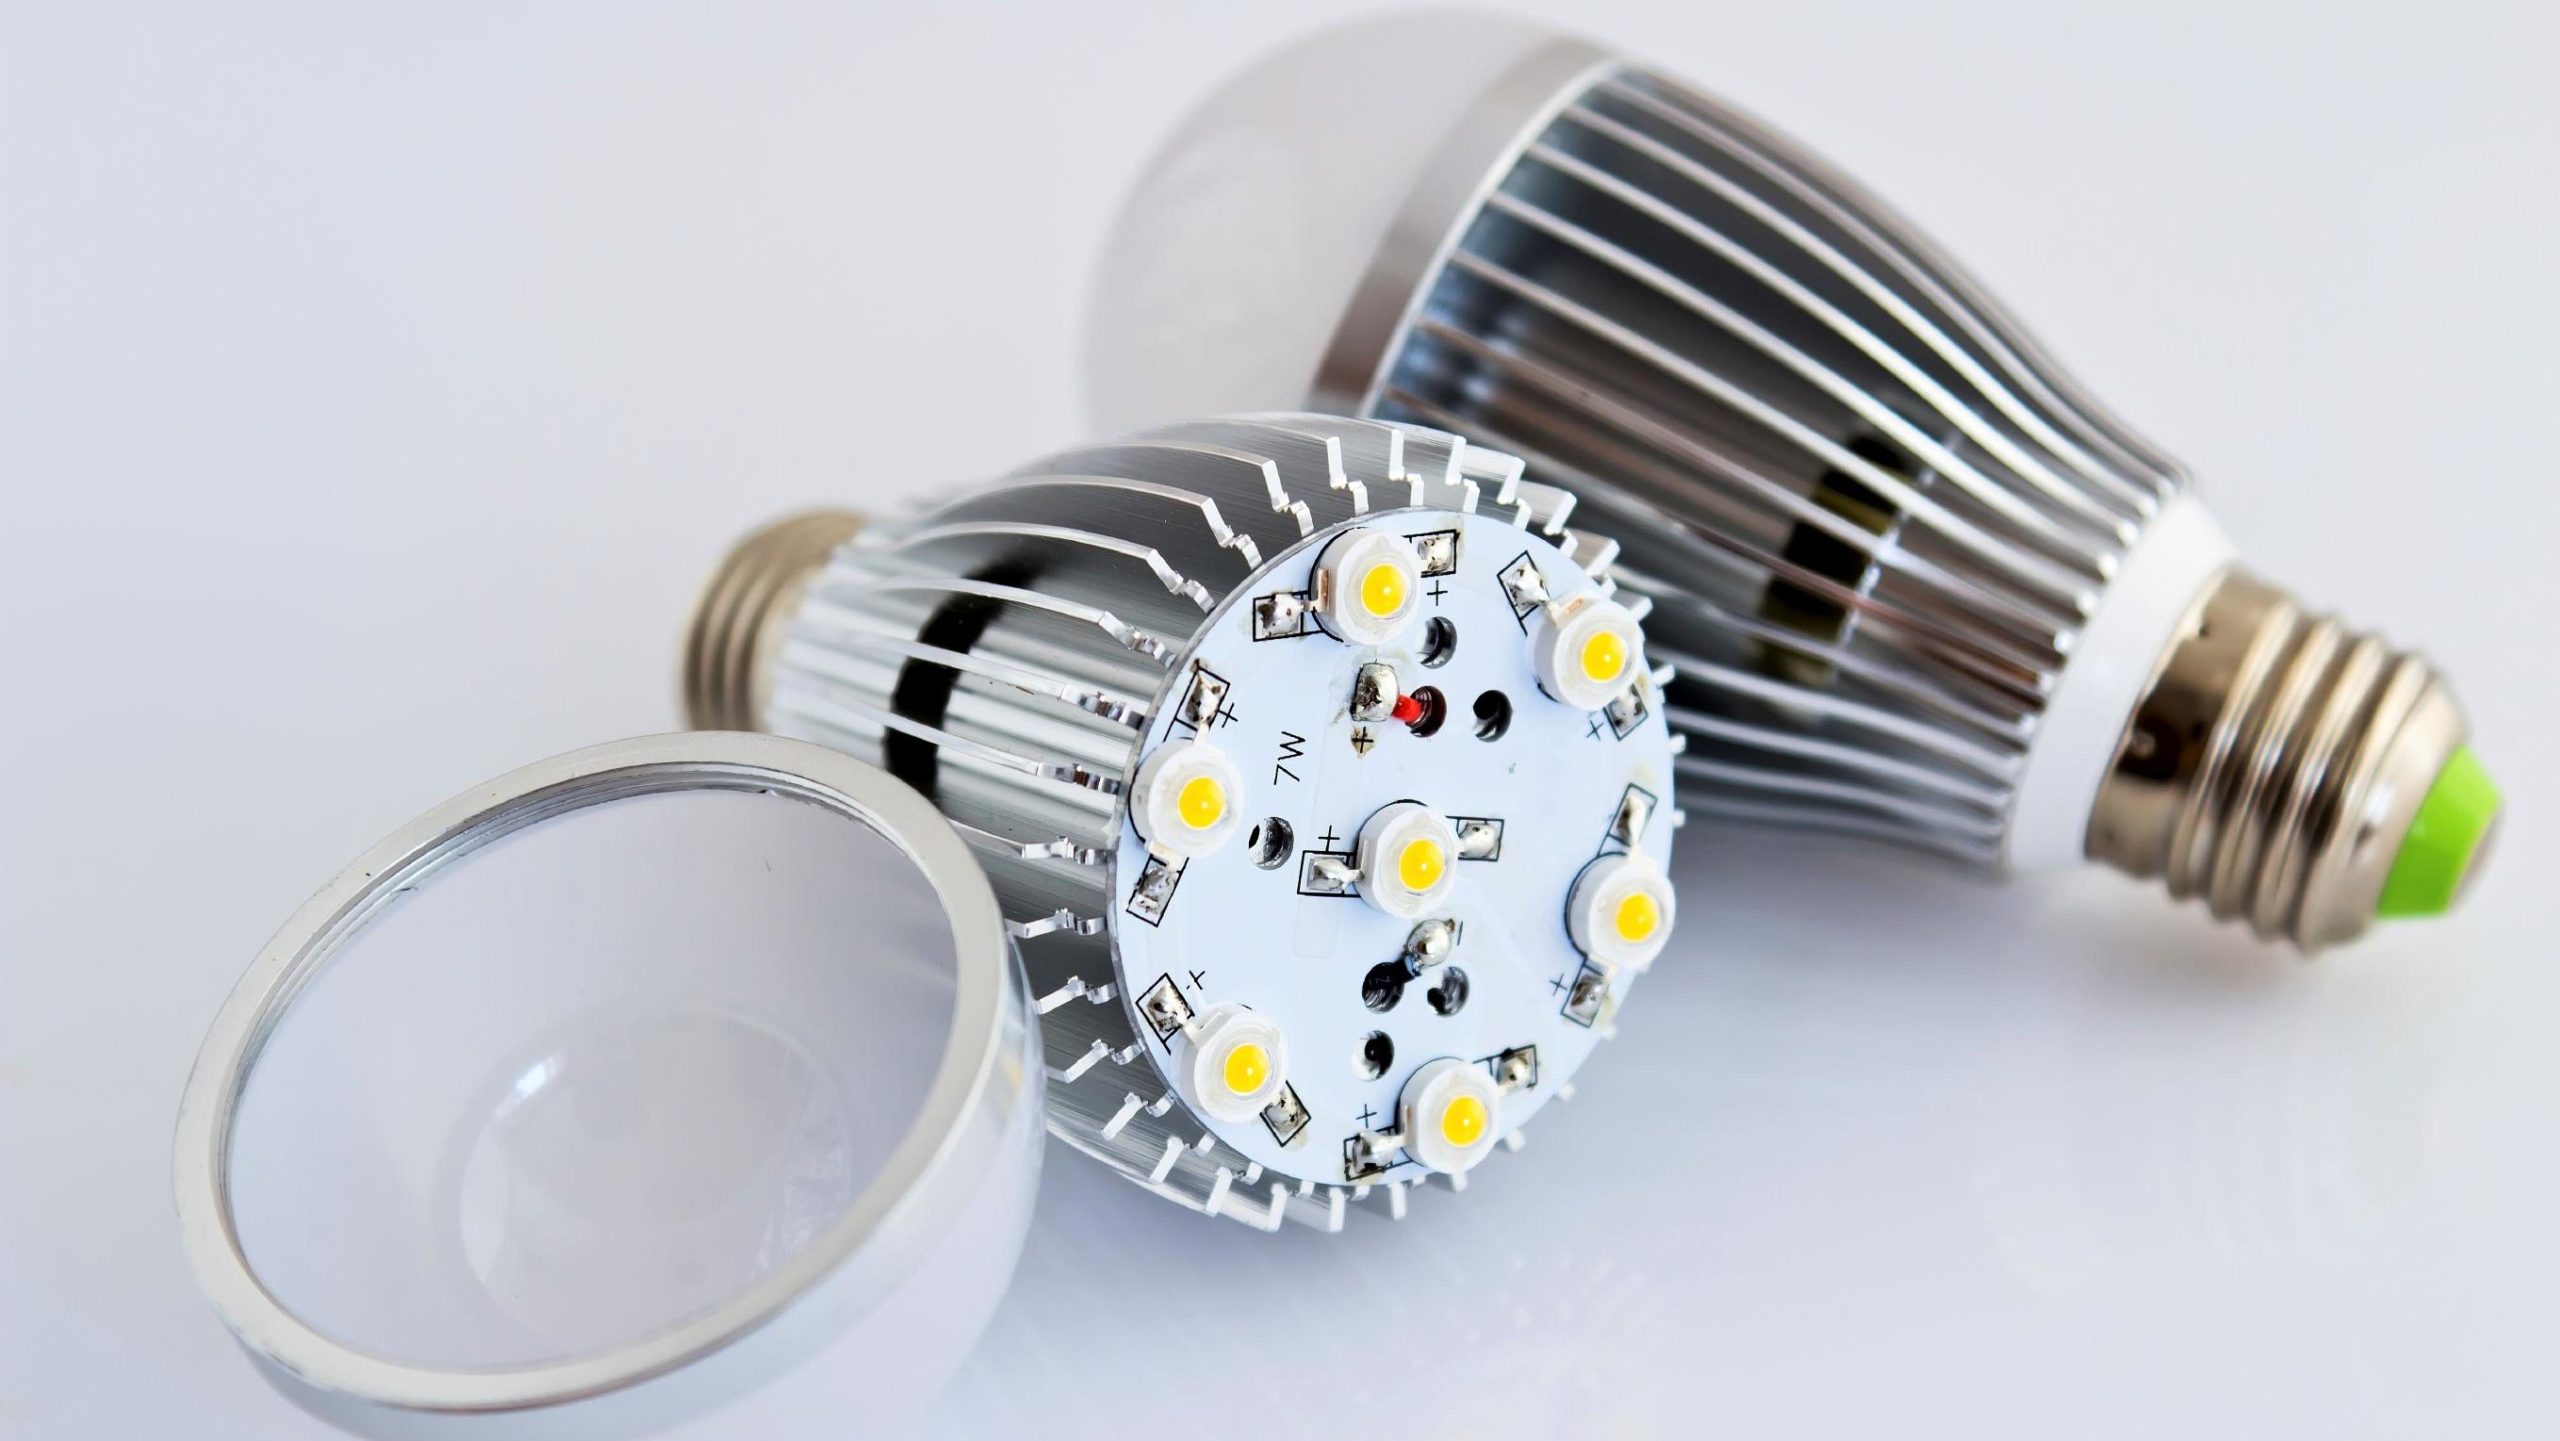 High Power LED Light Bulb With No Cover